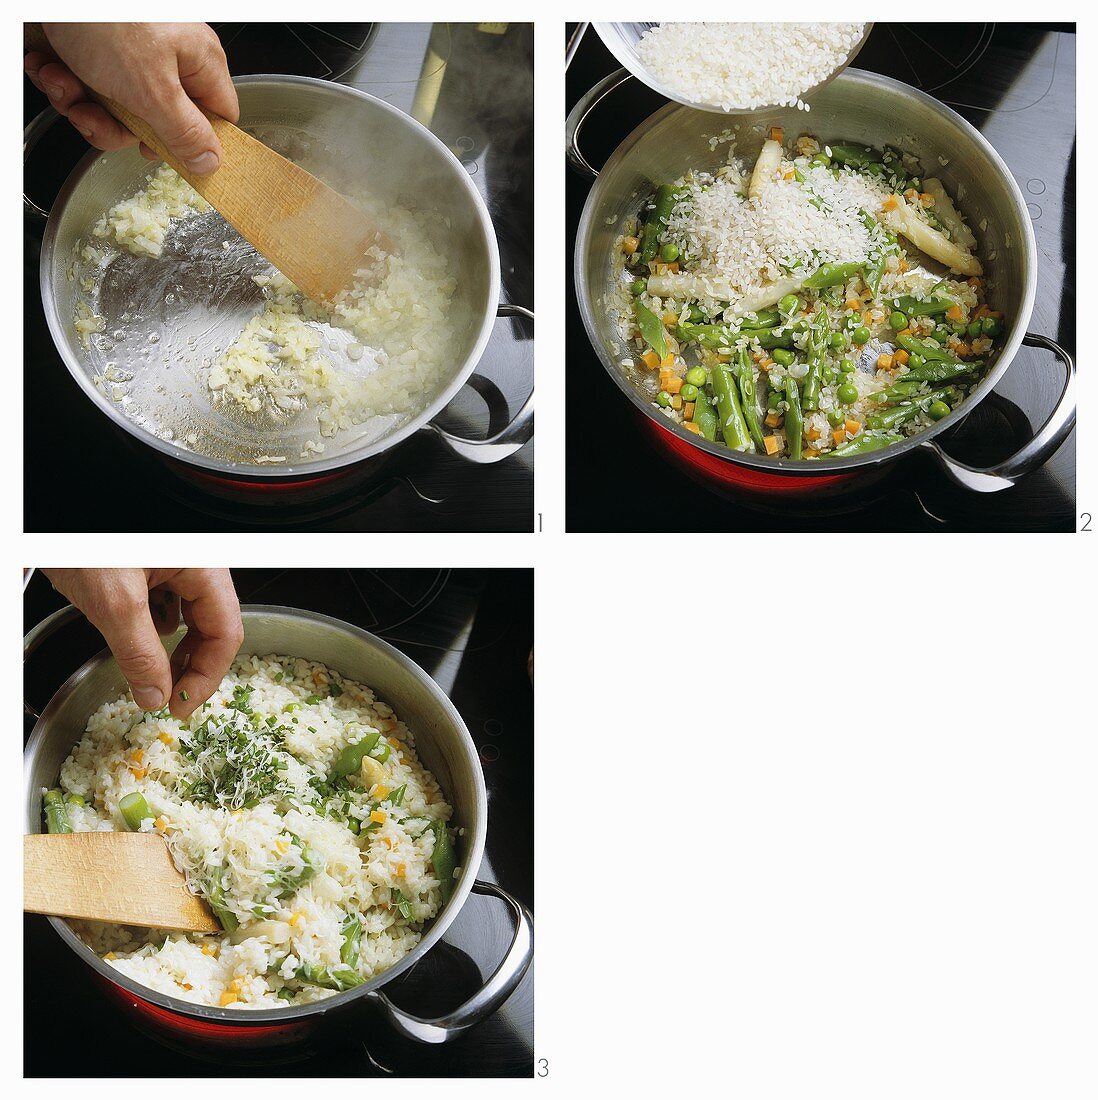 Making vegetable rice with green and white asparagus